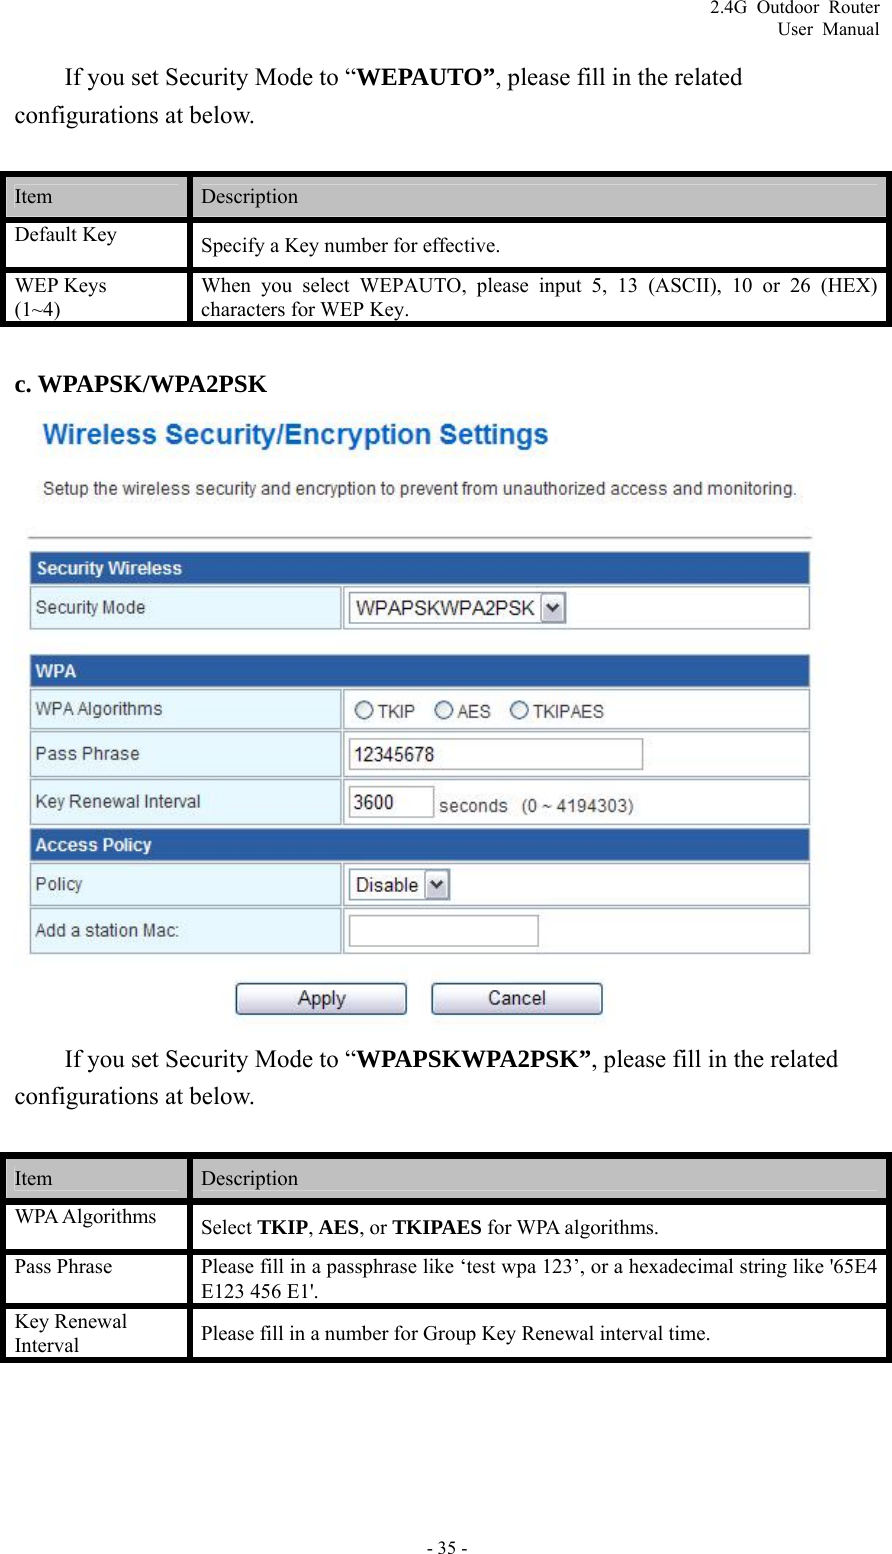 2.4G Outdoor Router User Manual If you set Security Mode to “WEPAUTO”, please fill in the related configurations at below.  Item   Description  Default Key  Specify a Key number for effective. WEP Keys ~4) UTO, please input 5, 13 (ASCII), 10 or 26 (HEX) characters for WEP Key. When you select WEPA(1 c. WPAPSK/WPA2PSK  If you set Security Mode to “WPAPSKWPA2PSK”, please fill in the related onfigurations at below. c Item   Description  WPA Algorithms  Select TKIP, AES, or TKIPAES for WPA algorithms. Pass Phrase  Please fill in a passphrase like ‘test wpa 123’, or a hexadecimal string like &apos;65E4 E123 456 E1&apos;. Key Renewal Interval Please fill in a number for Group Key Renewal interval time. - 35 - 